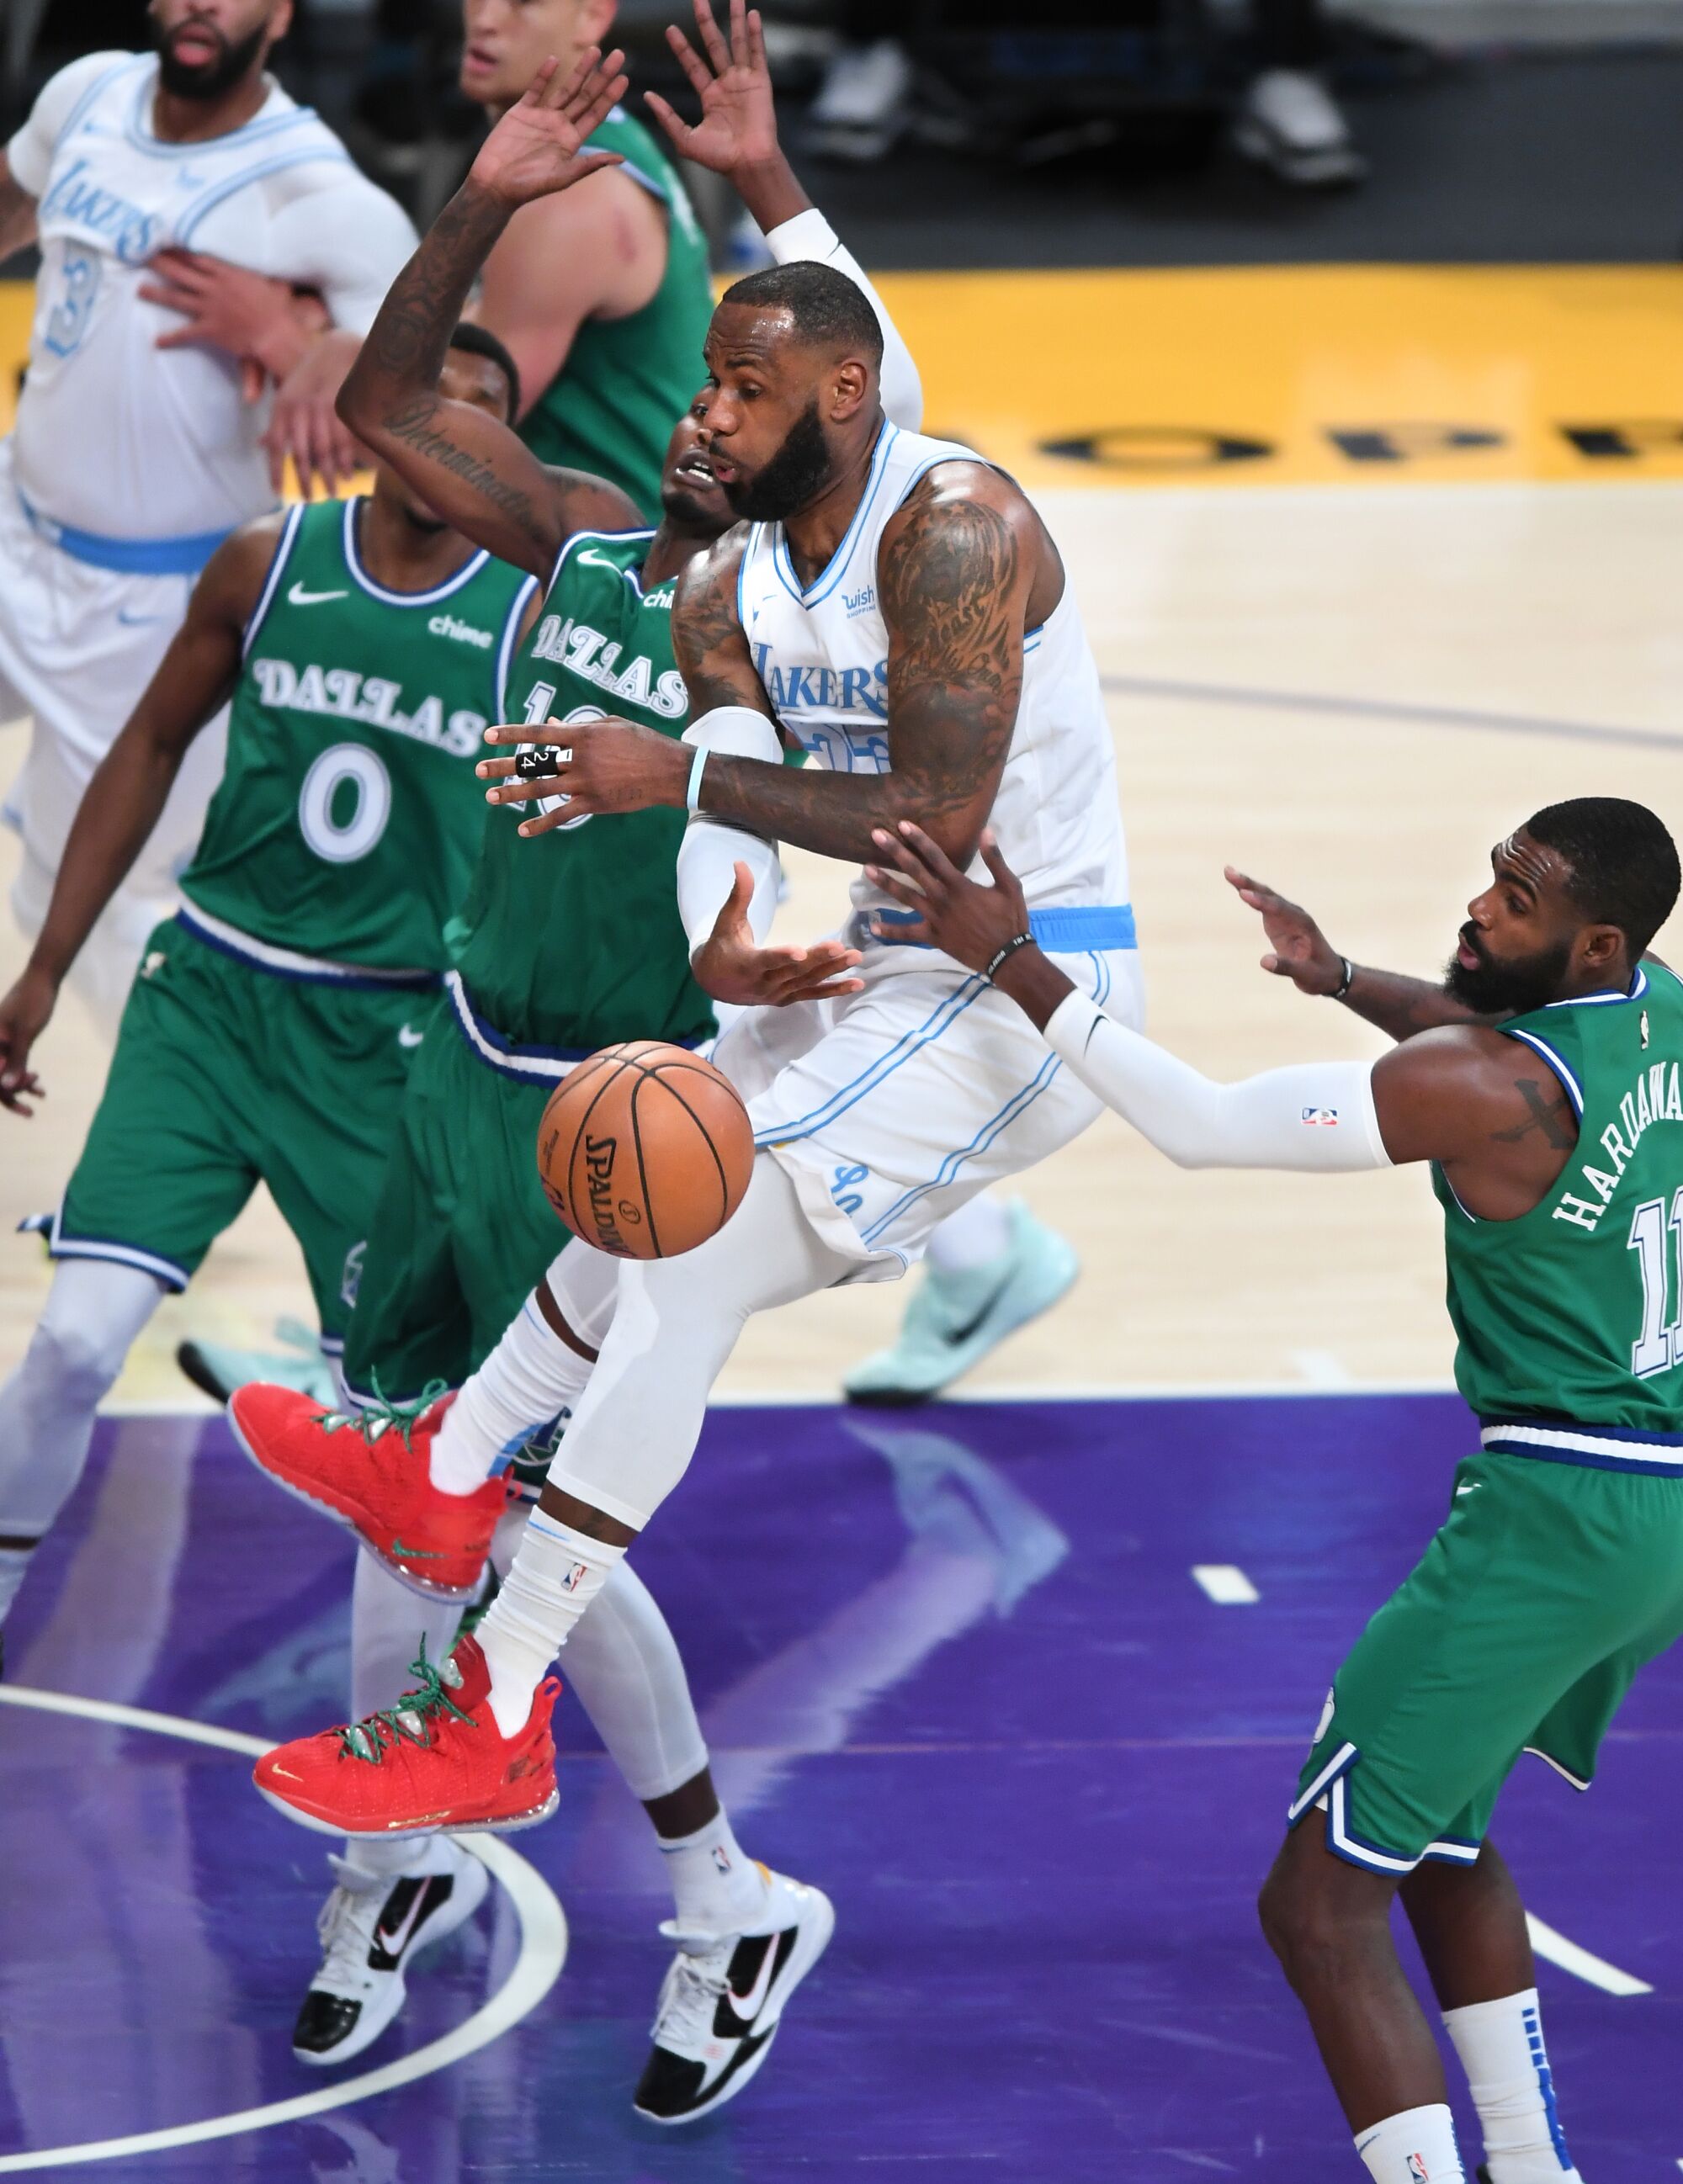 Lakers forward LeBron James flings a no-look pass against the Dallas Mavericks during the second quarter.